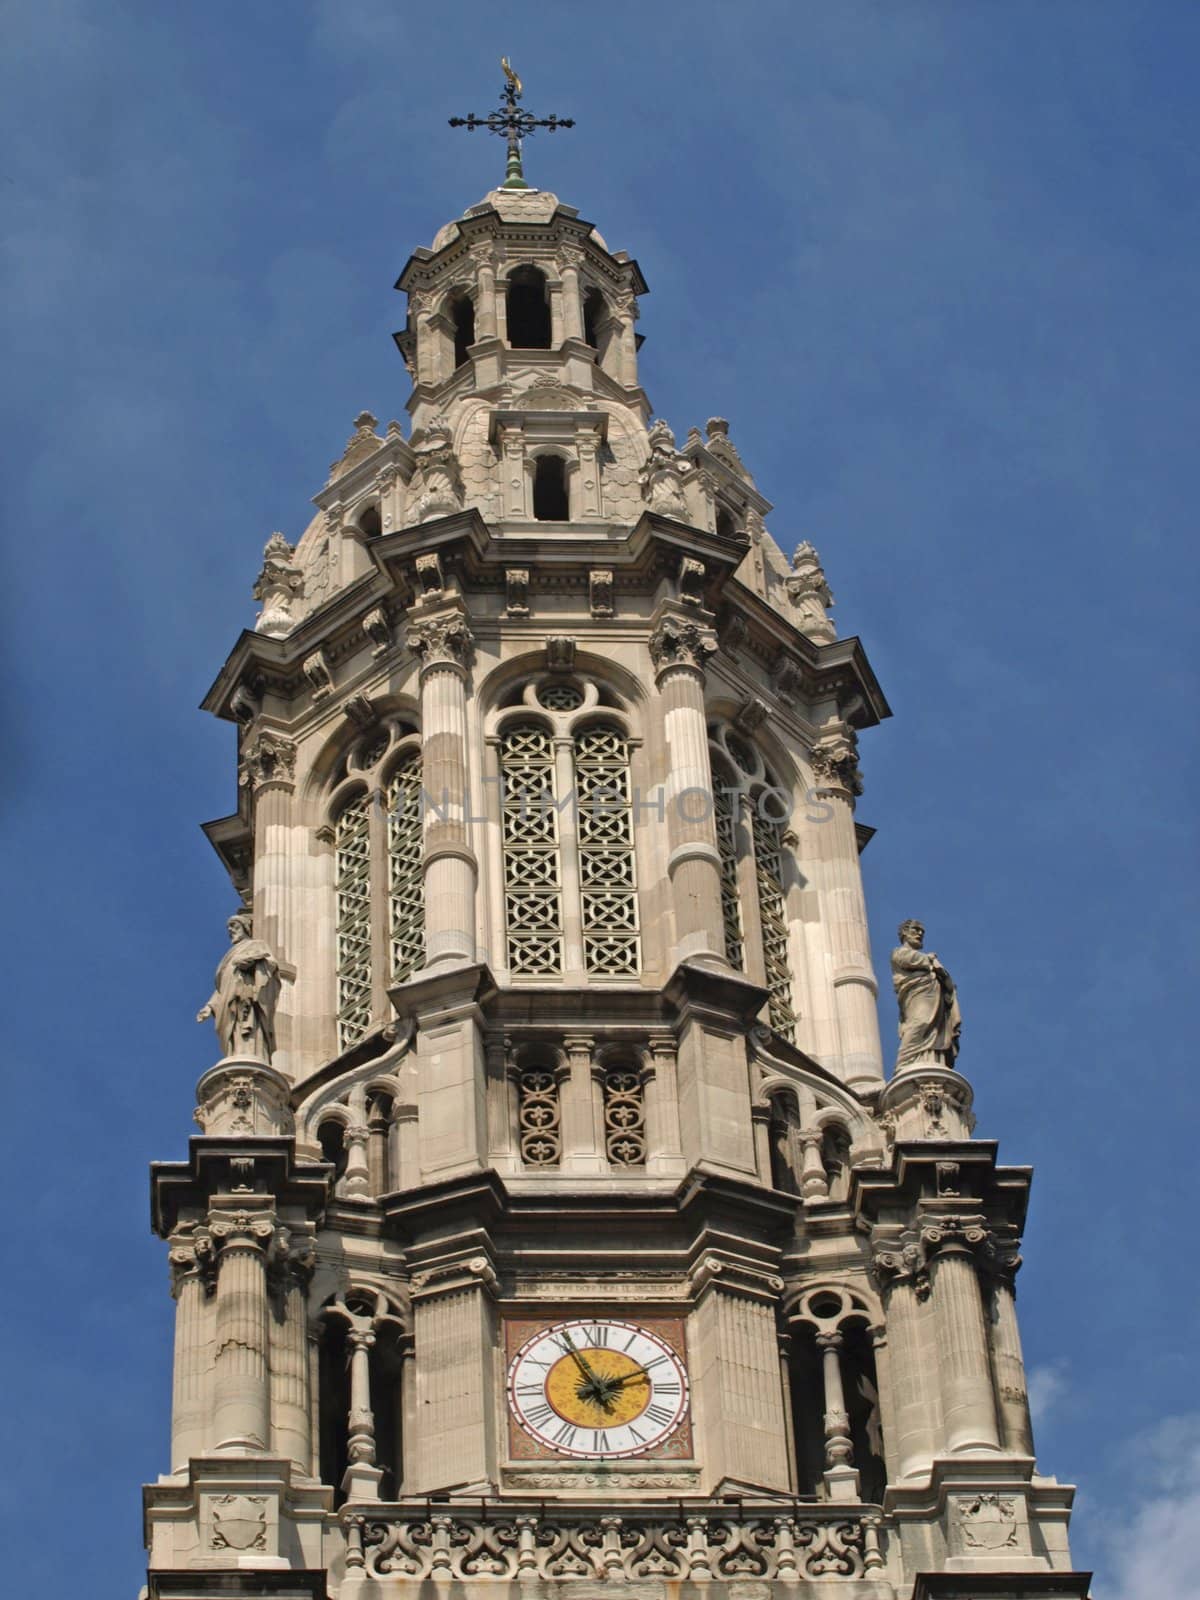 The bell tower of the Trinity Church in Paris